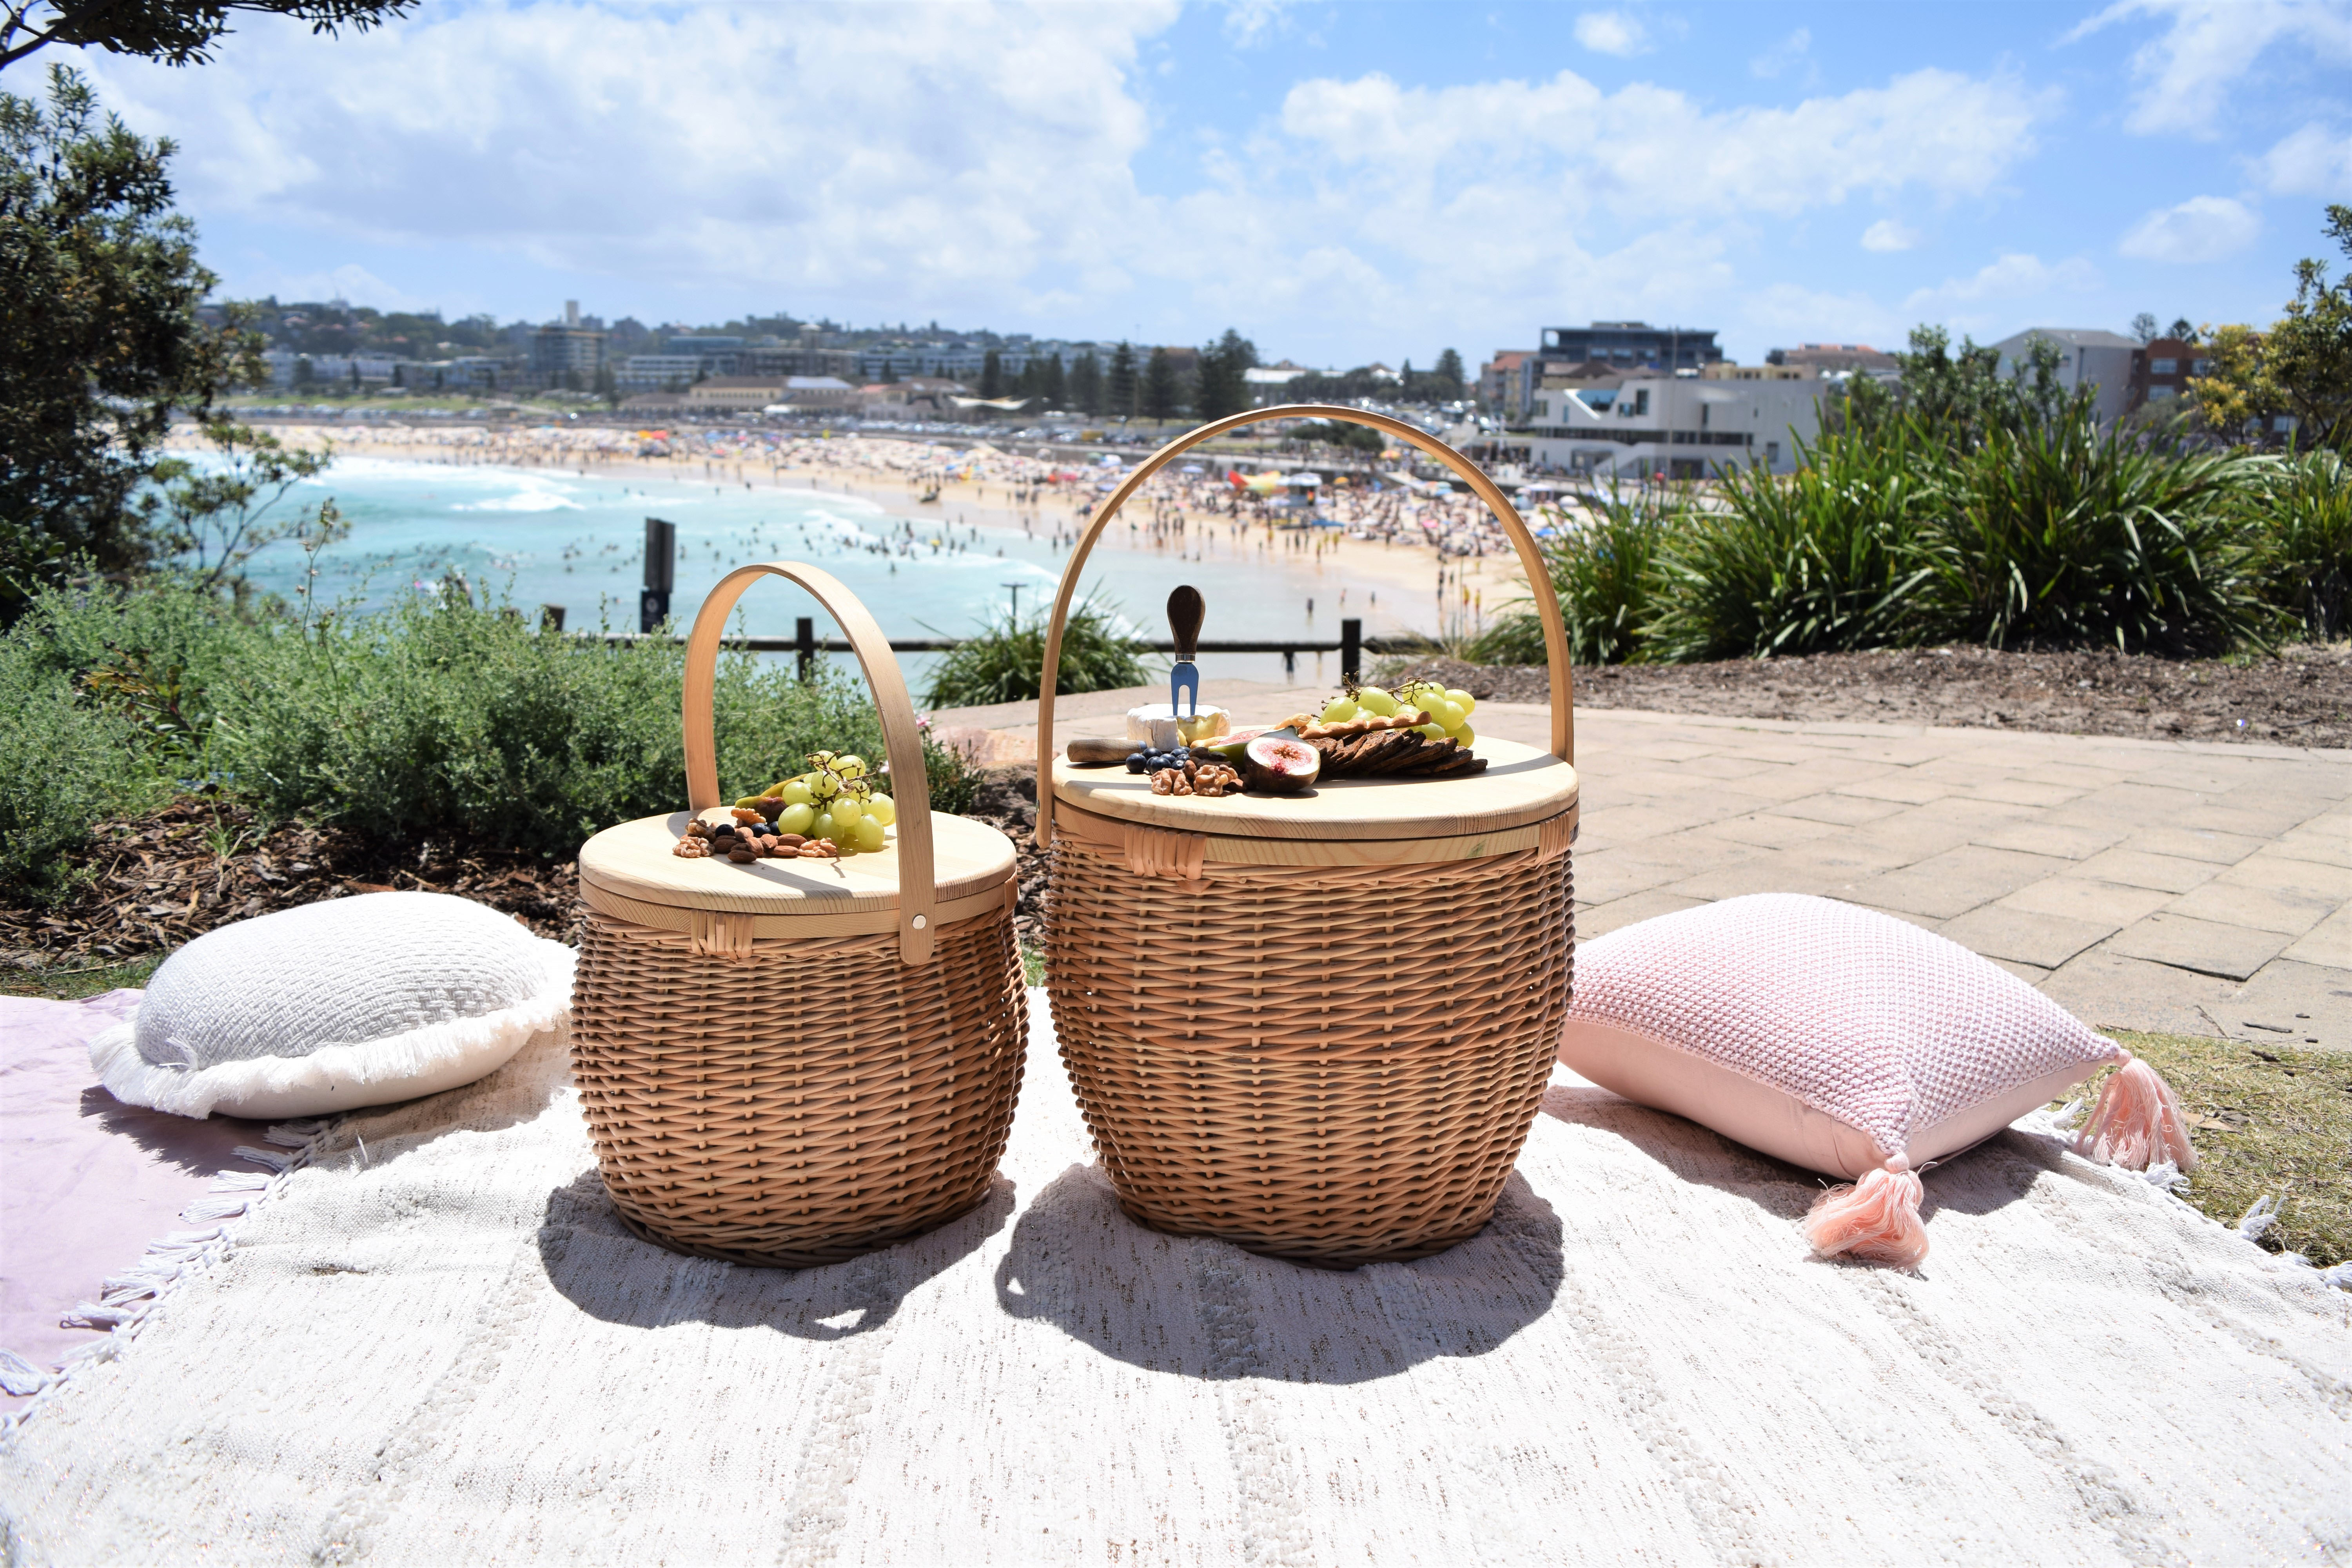 Your dream picnic basket has just arrived...